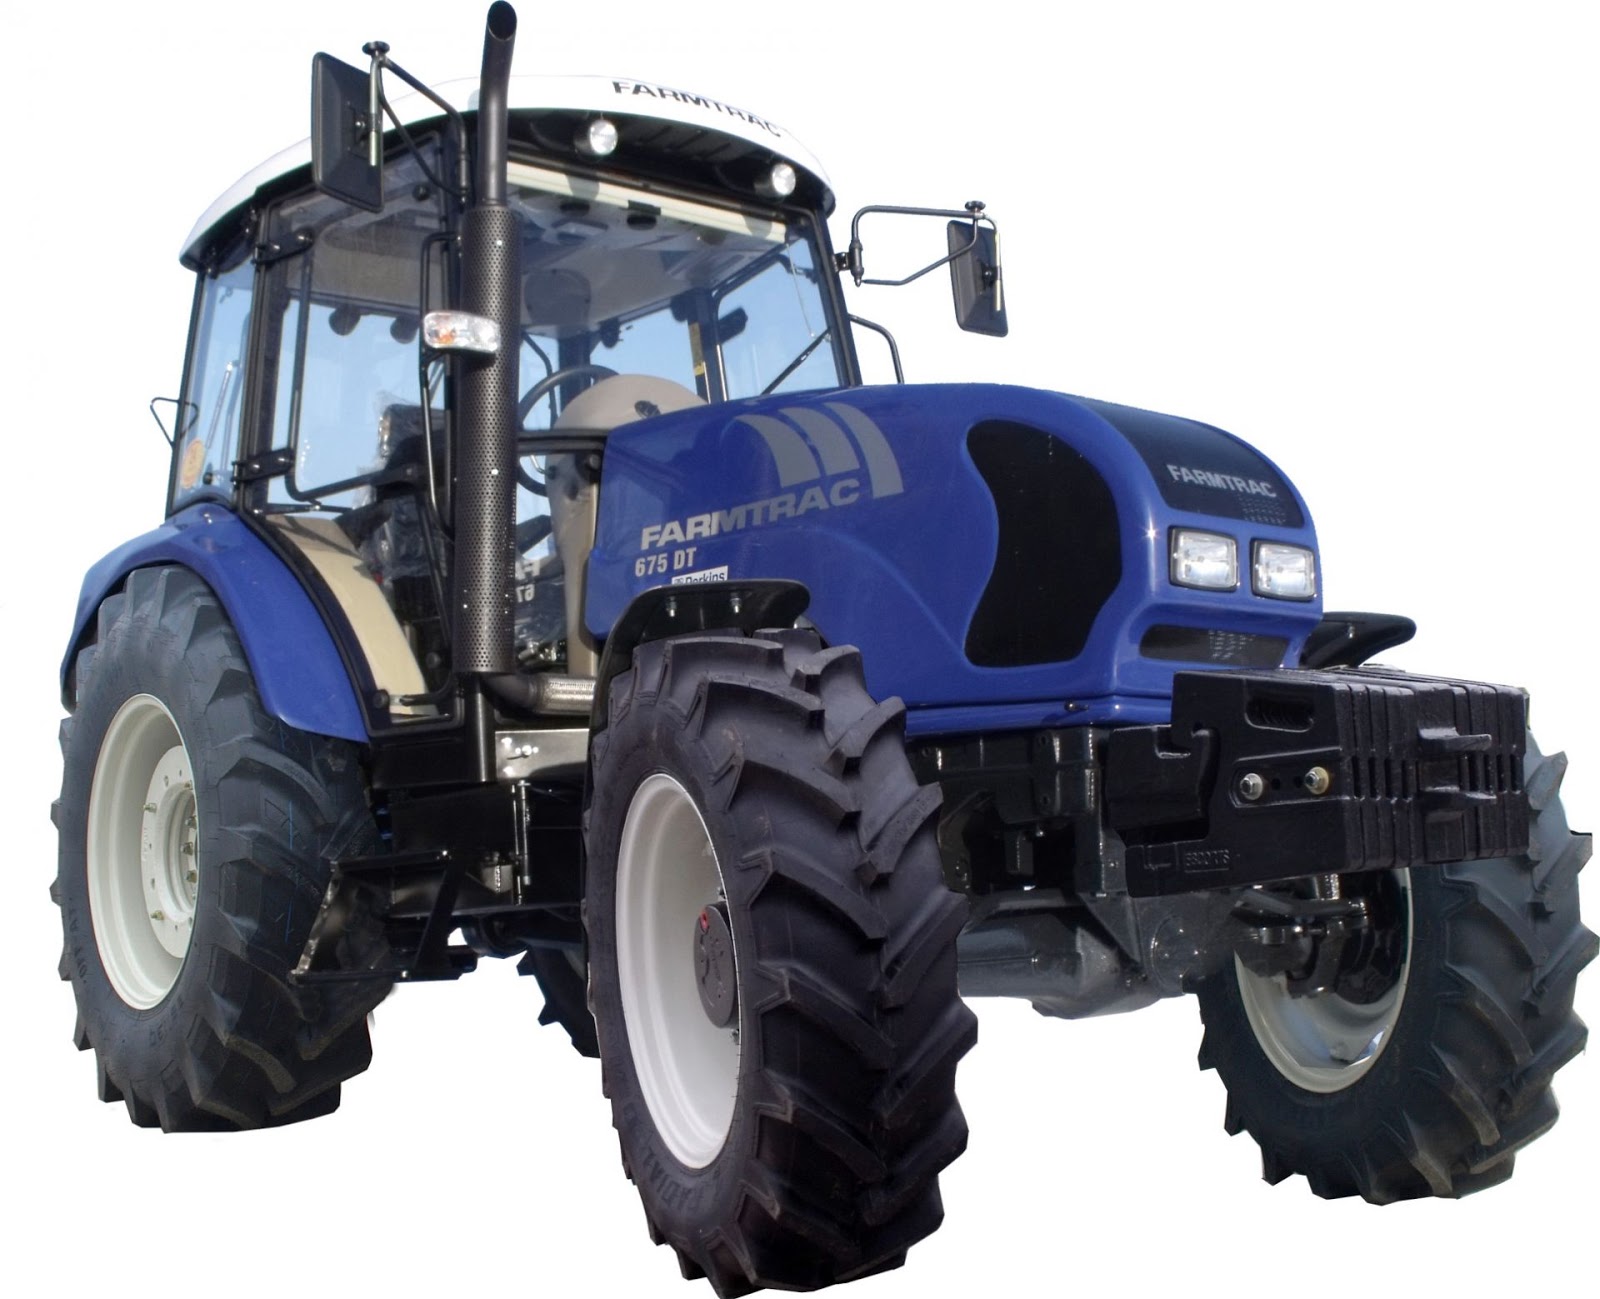 TractoRate: Farmtrac 675 DT (75hp)